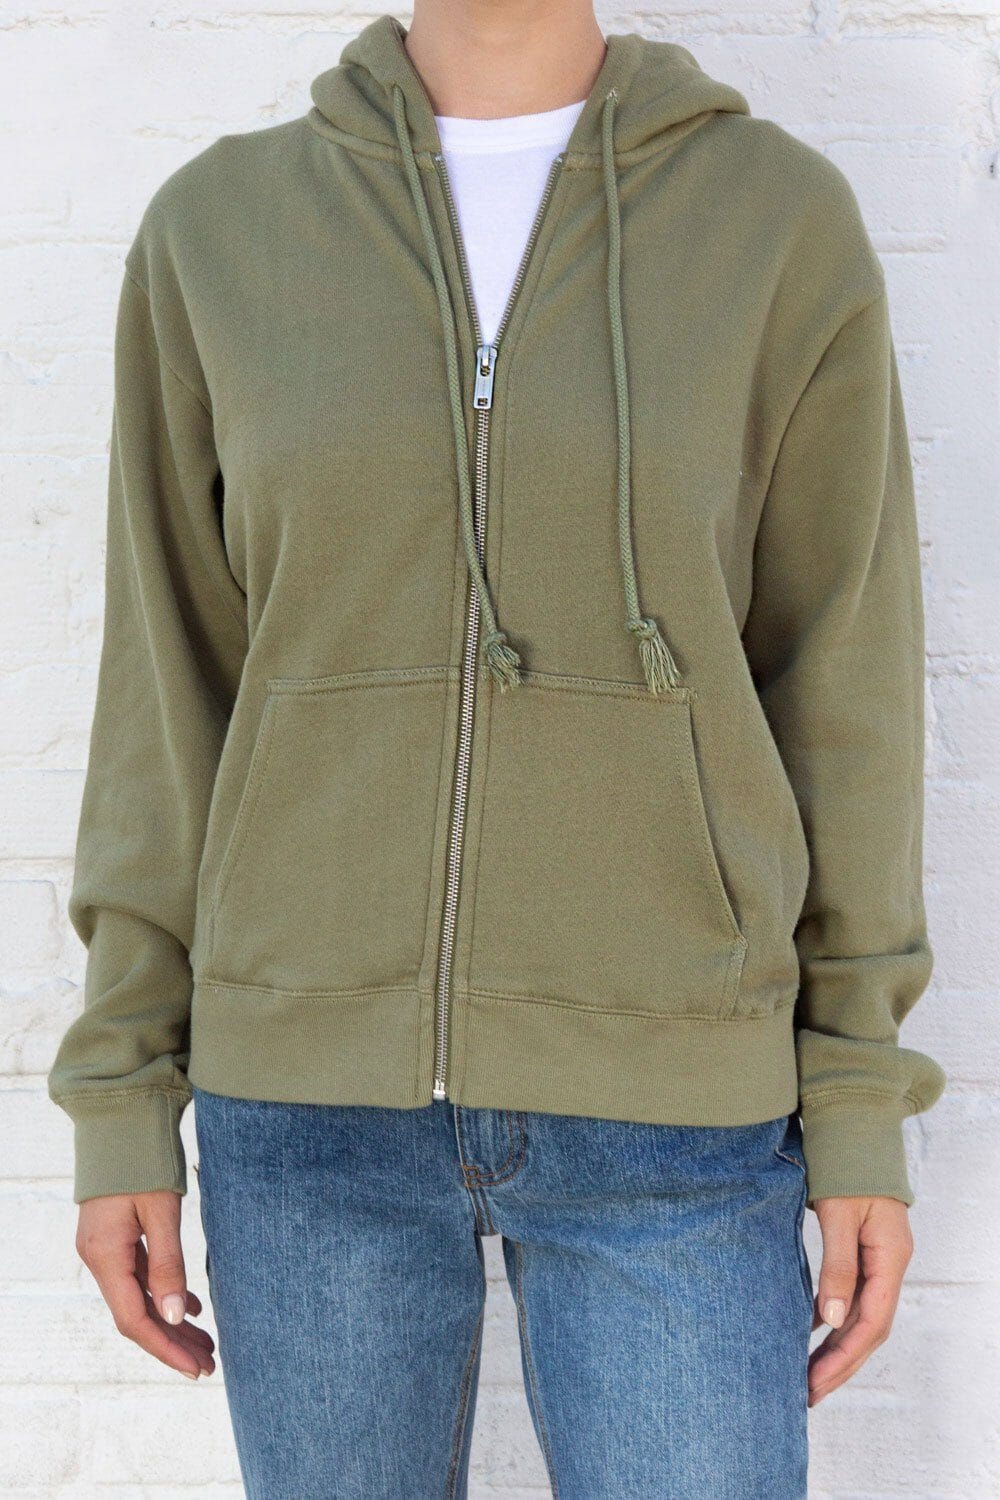 Carla Hoodie from Brandy Melville on 21 Buttons